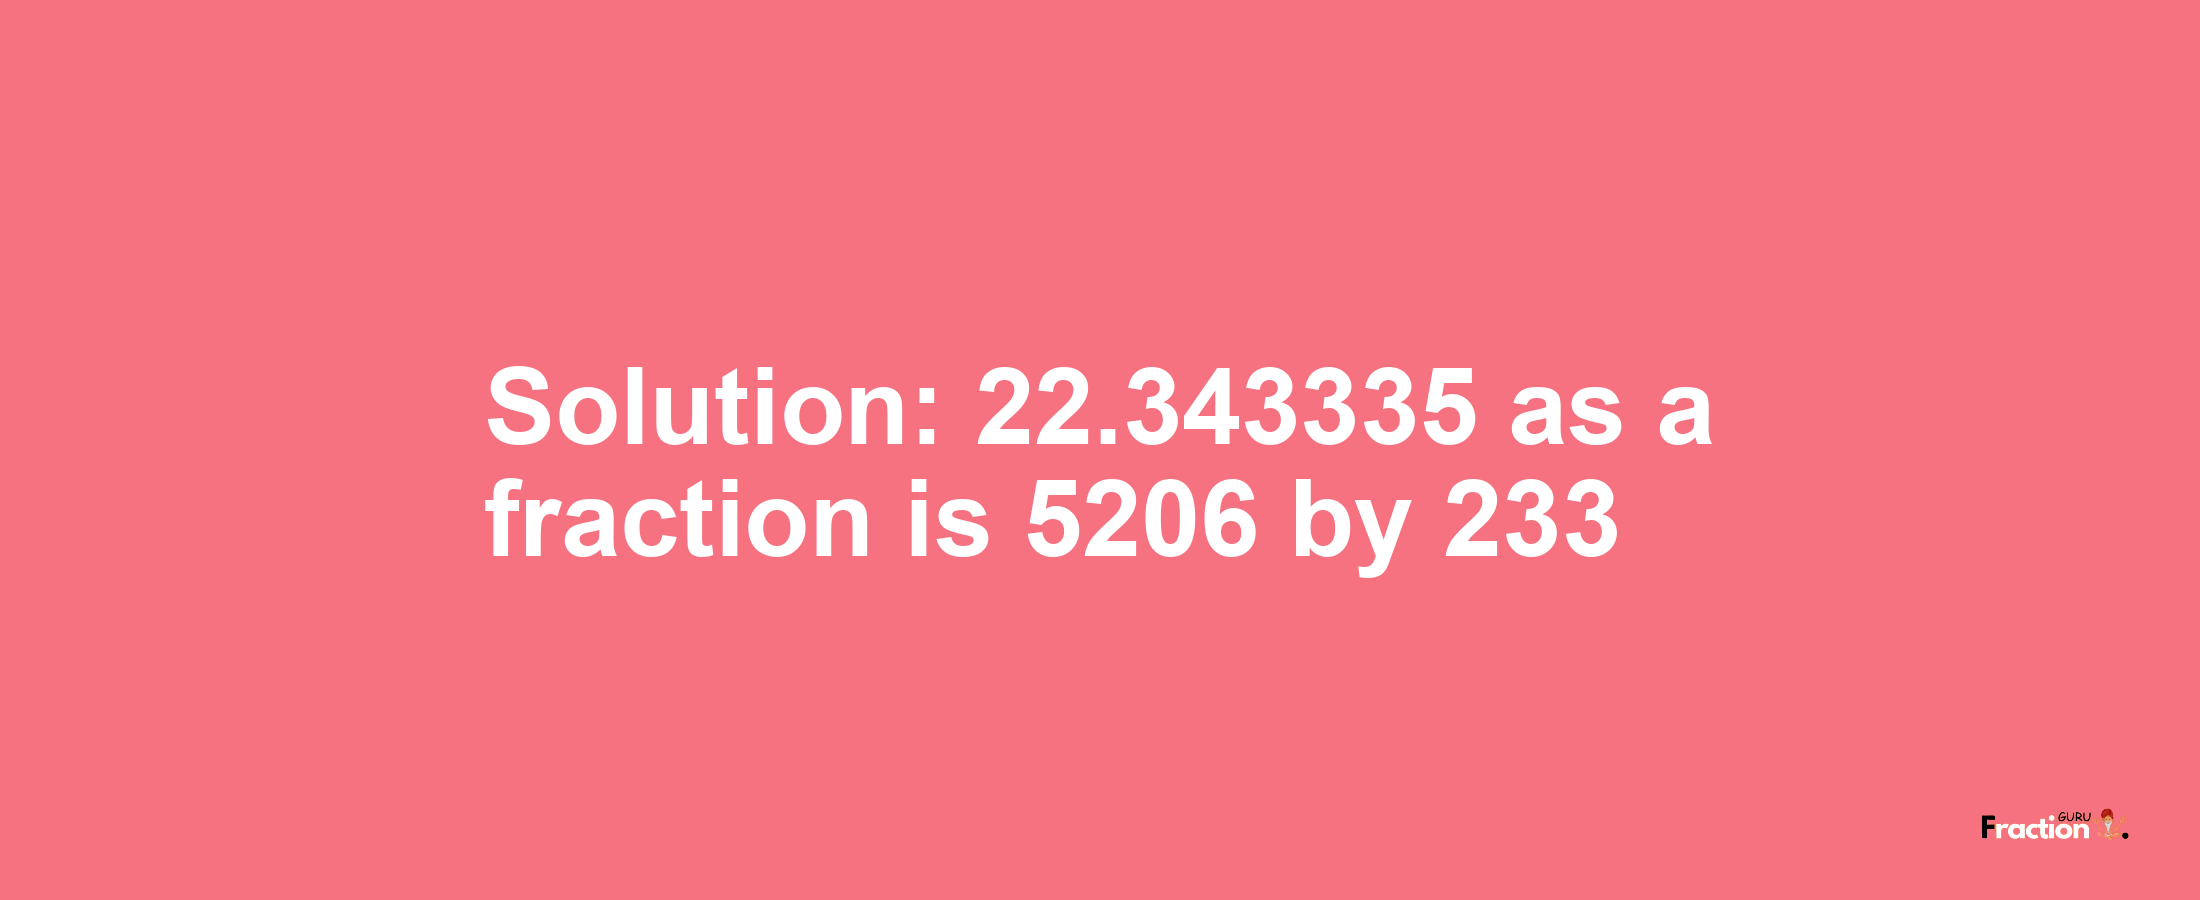 Solution:22.343335 as a fraction is 5206/233